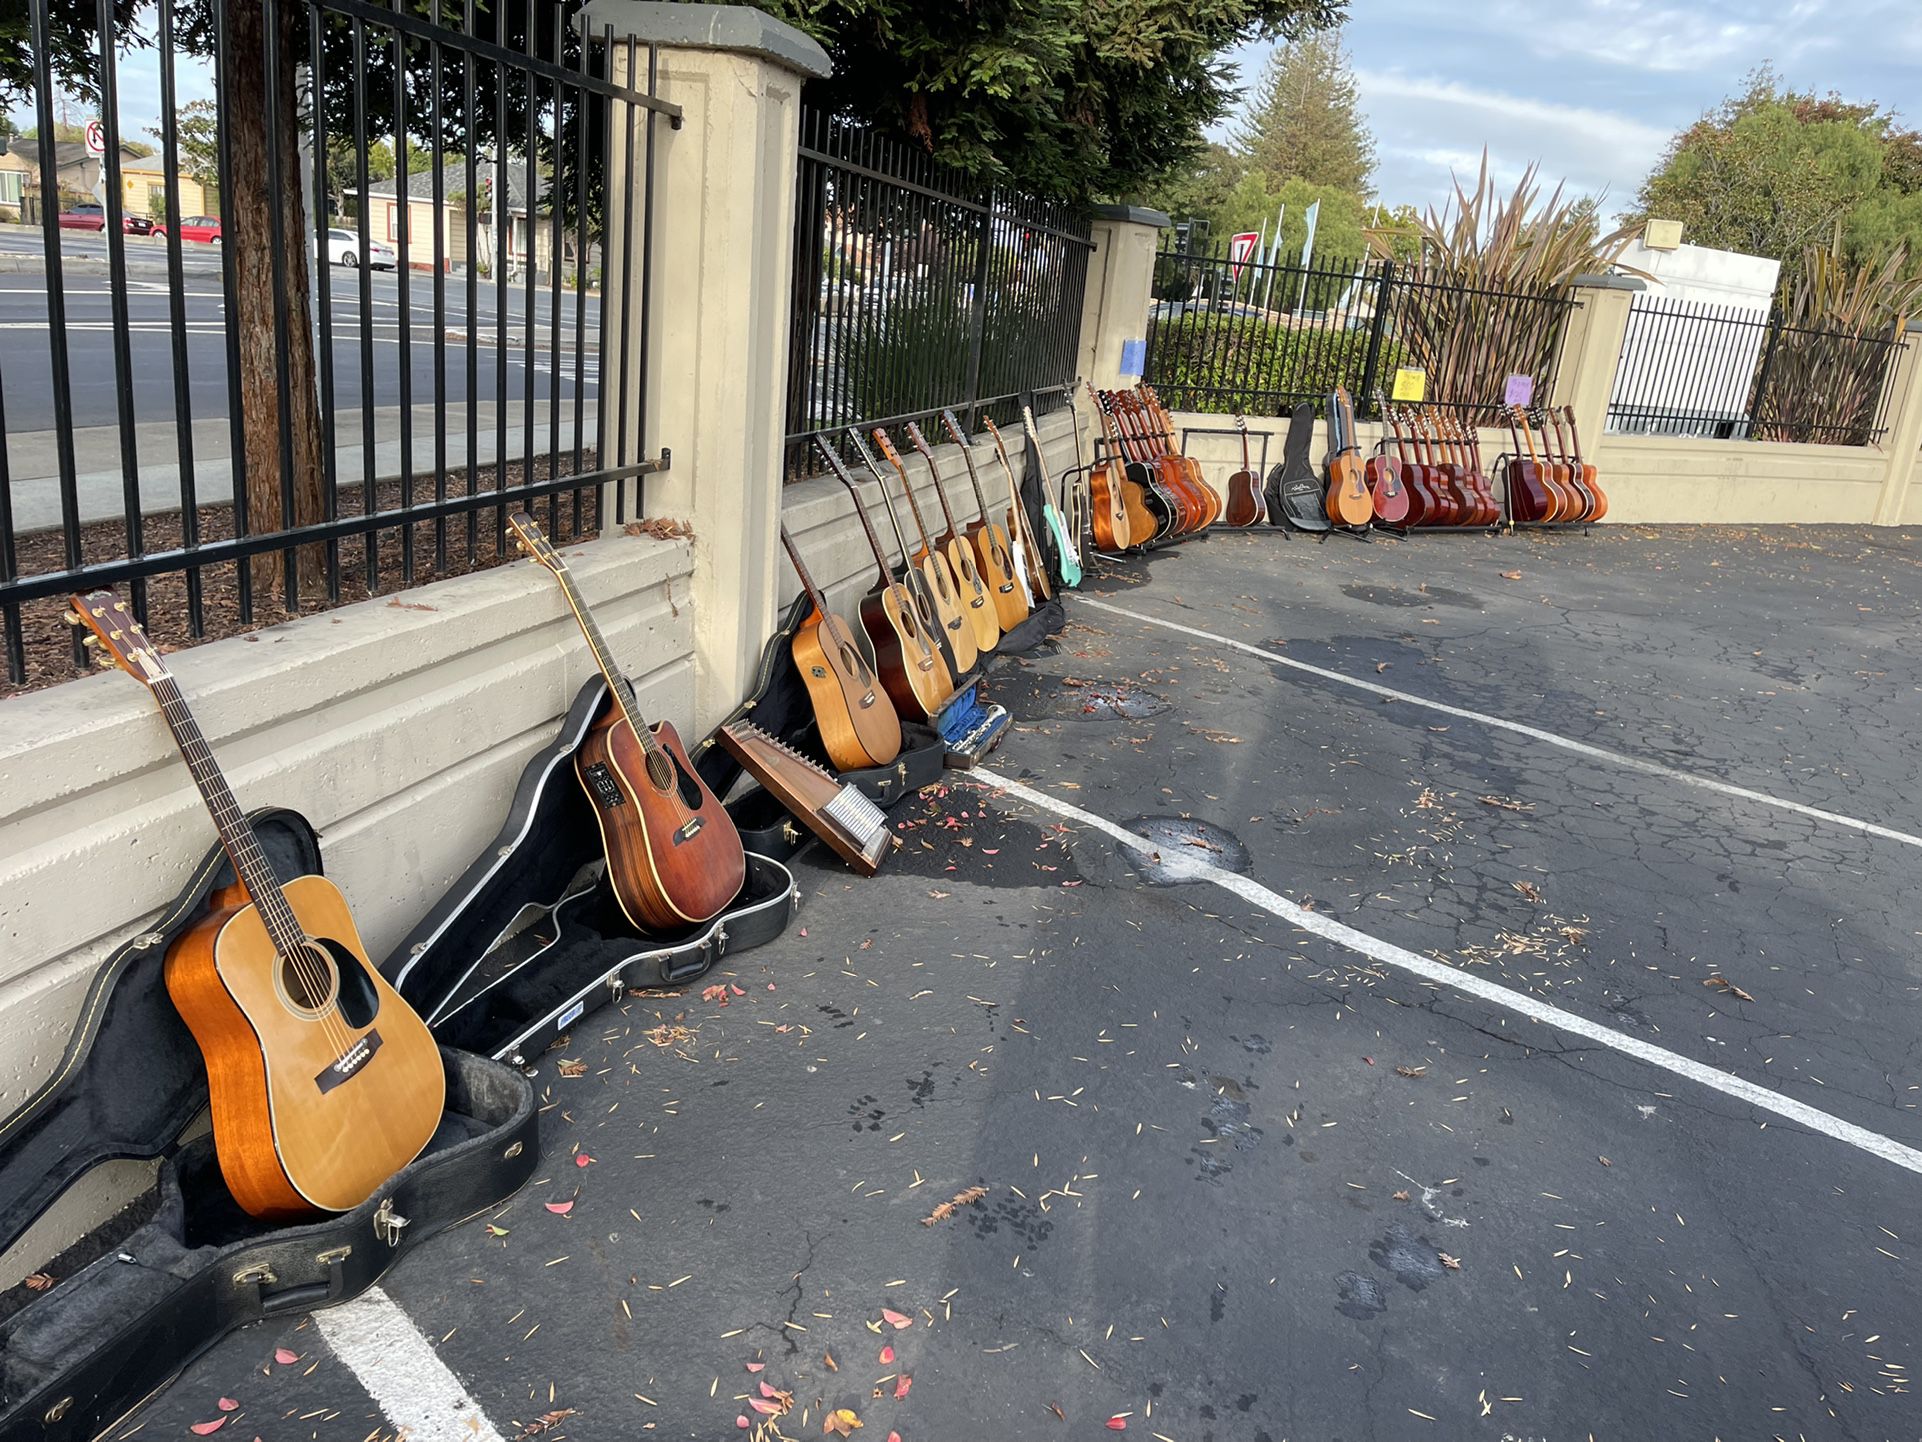 Guitar Sale Today!